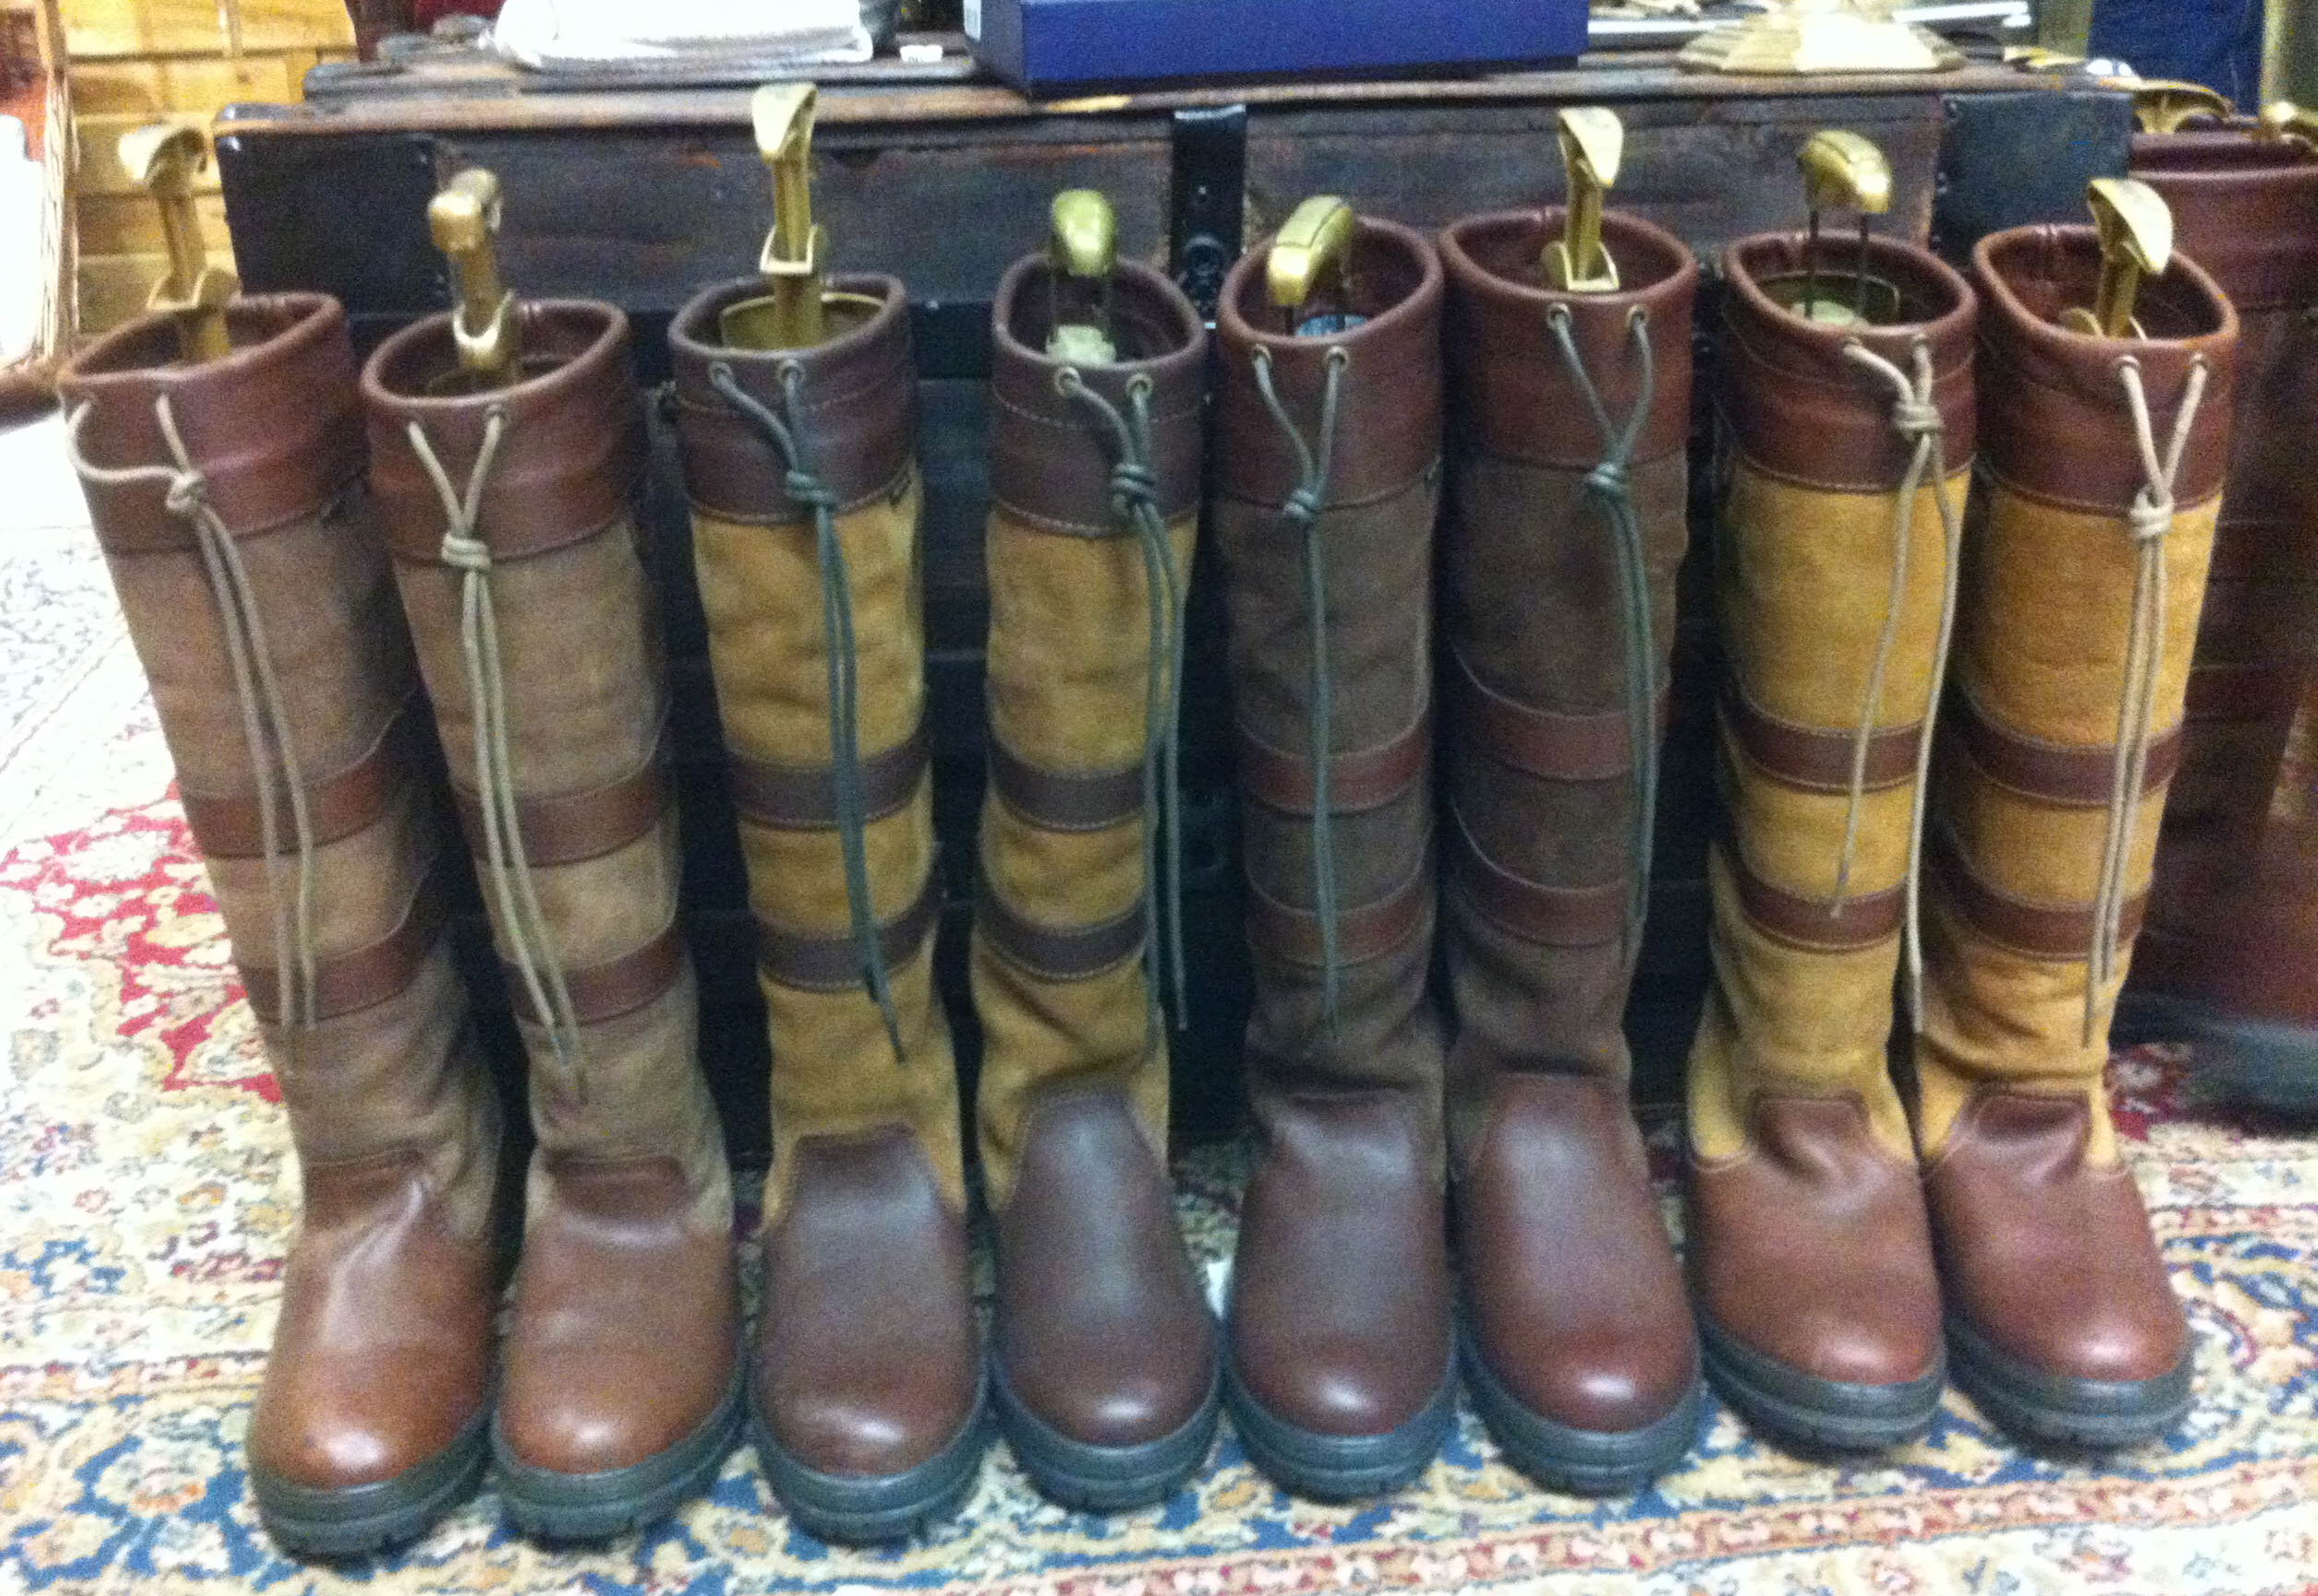 Featuring Dubarry from the Washington International Horse Show 2012